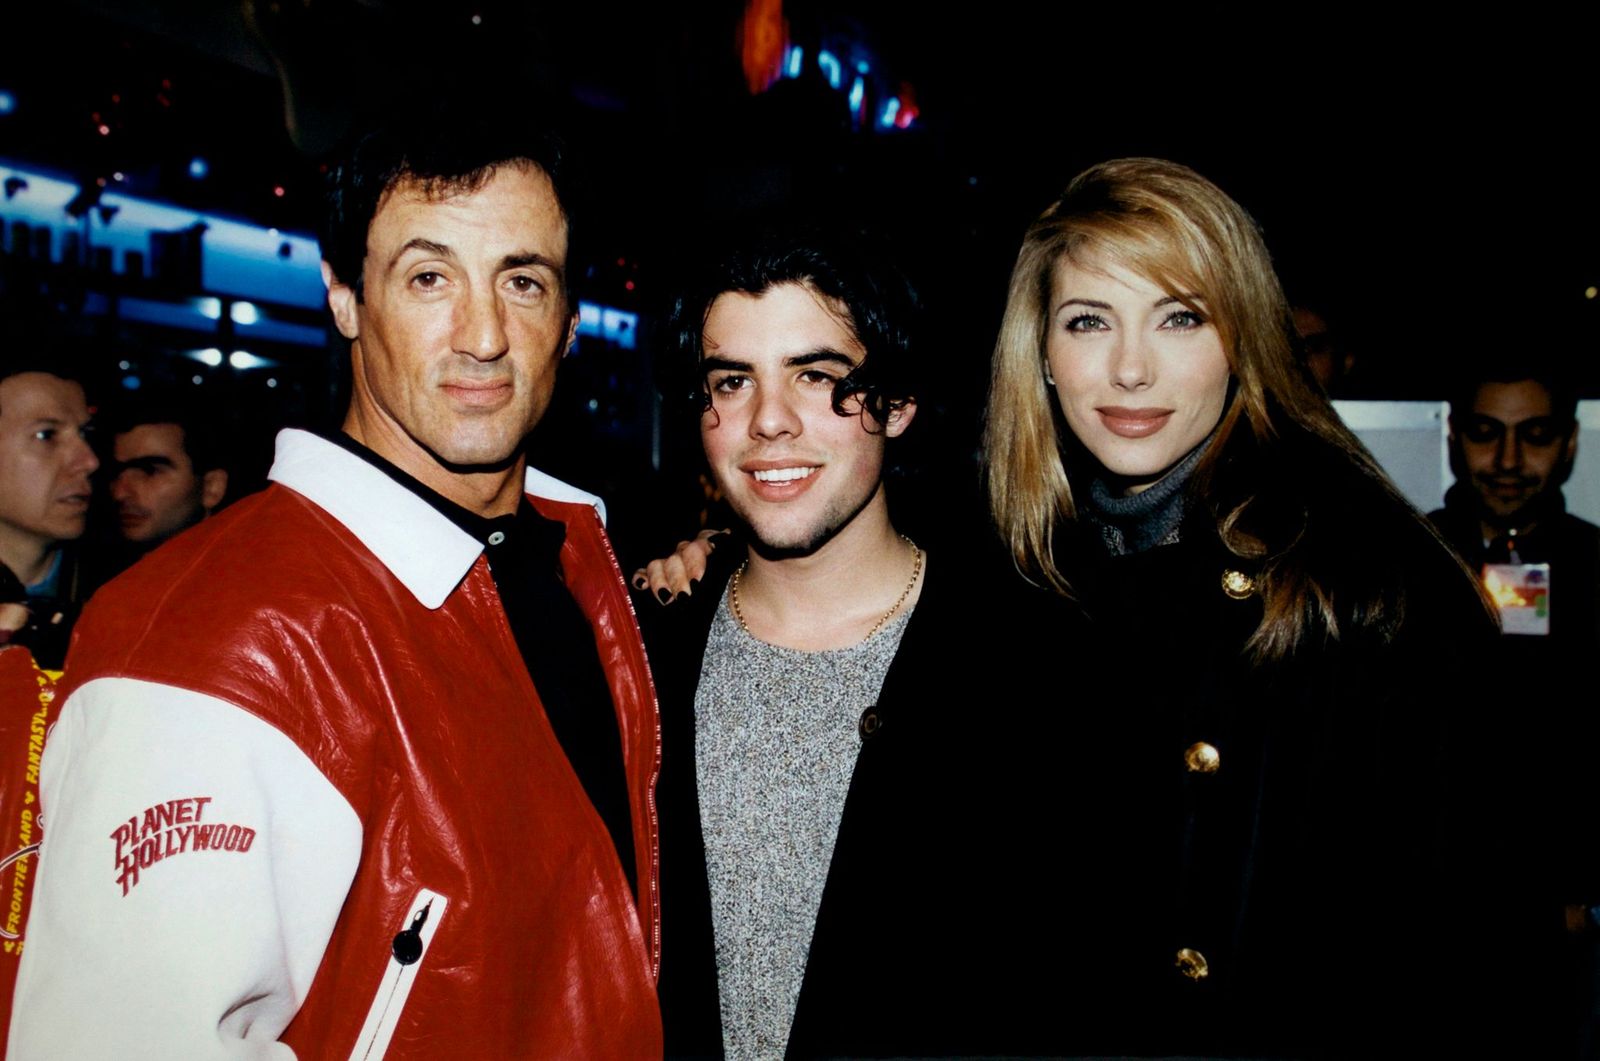 Sylvester and Sage Stallone, and Jennifer Flavin at the inauguration of the  Planet Hollywood restaurant on November 25, 1995, in Marne-la-Vallée, France. | Source: ARNAL-PAT/Gamma-Rapho/Getty Images